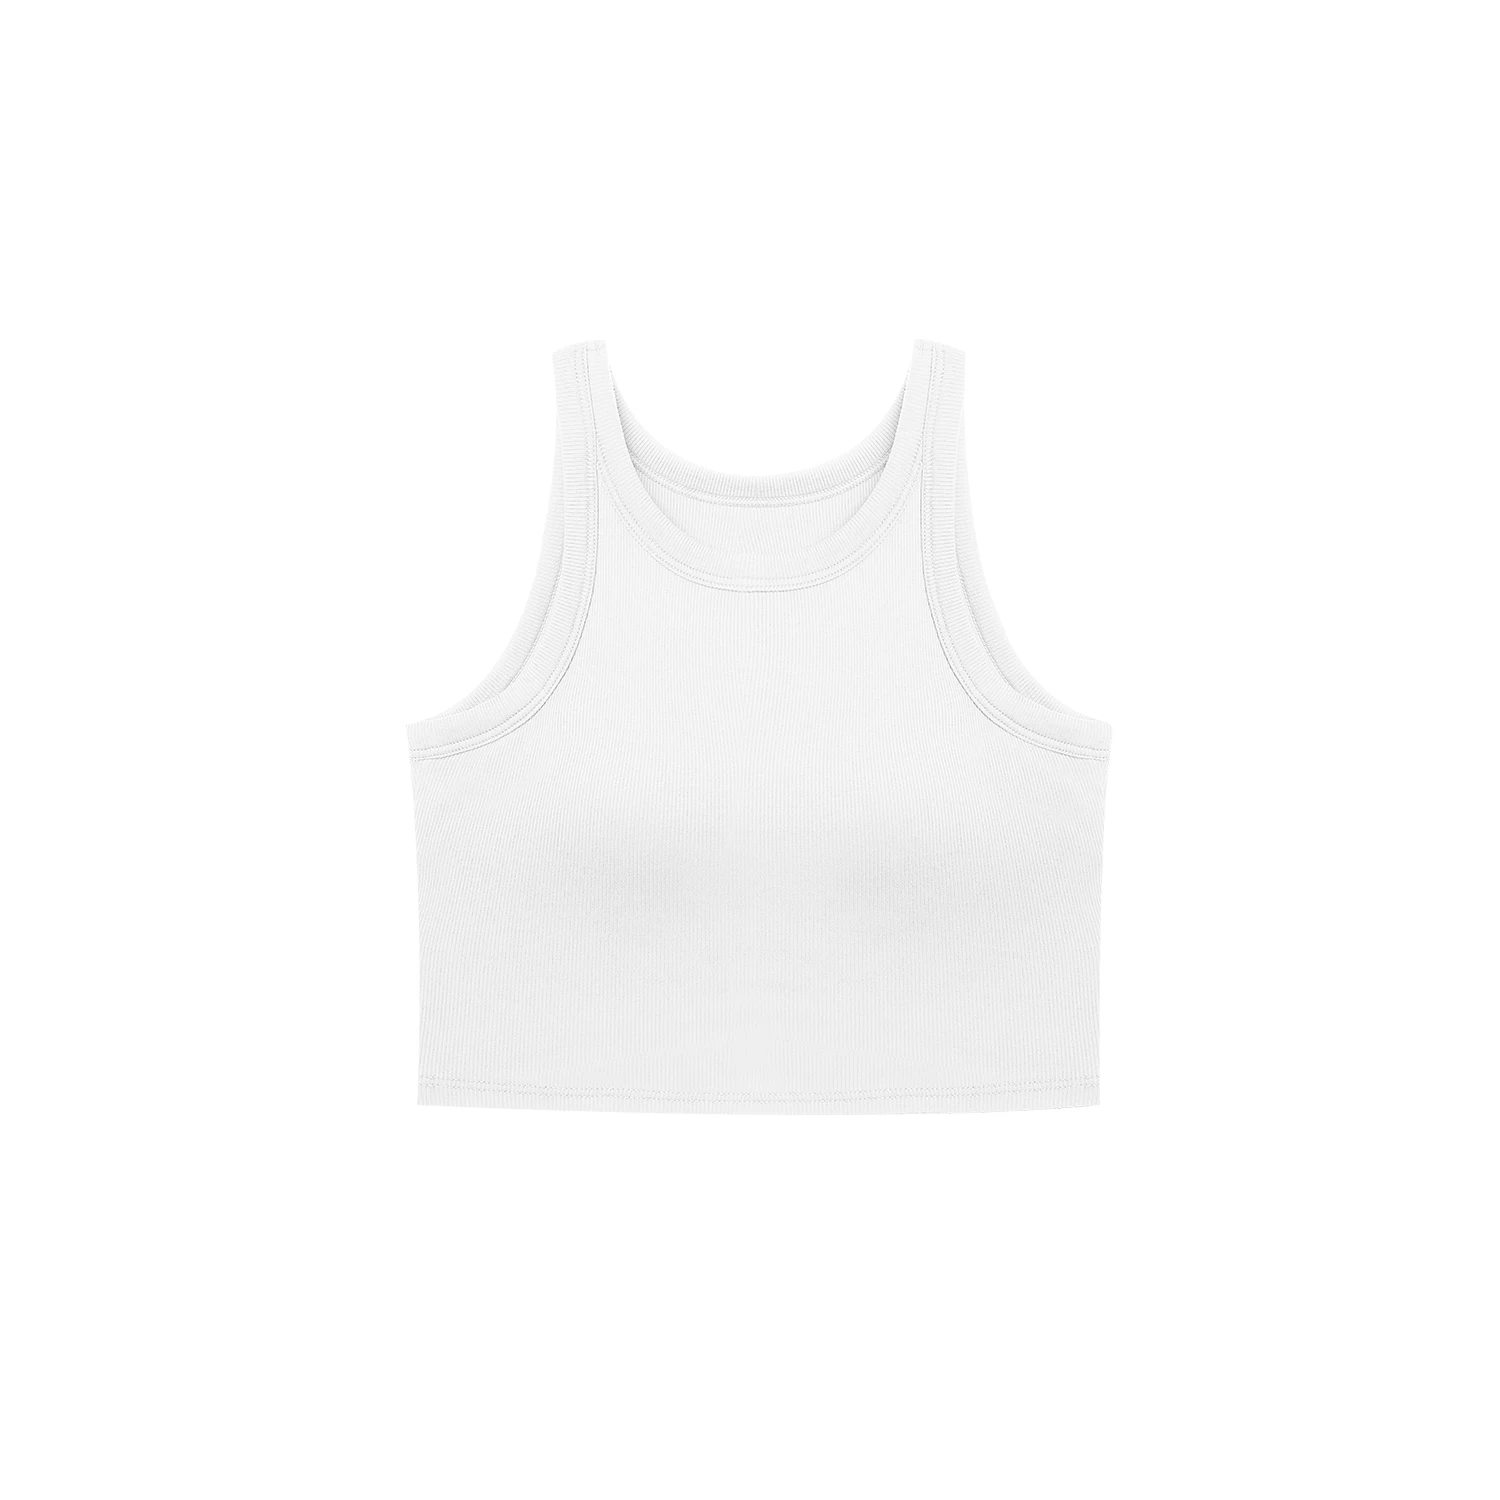 Crop Tank Top With Built In Bra For Women Fitness Shirts Off